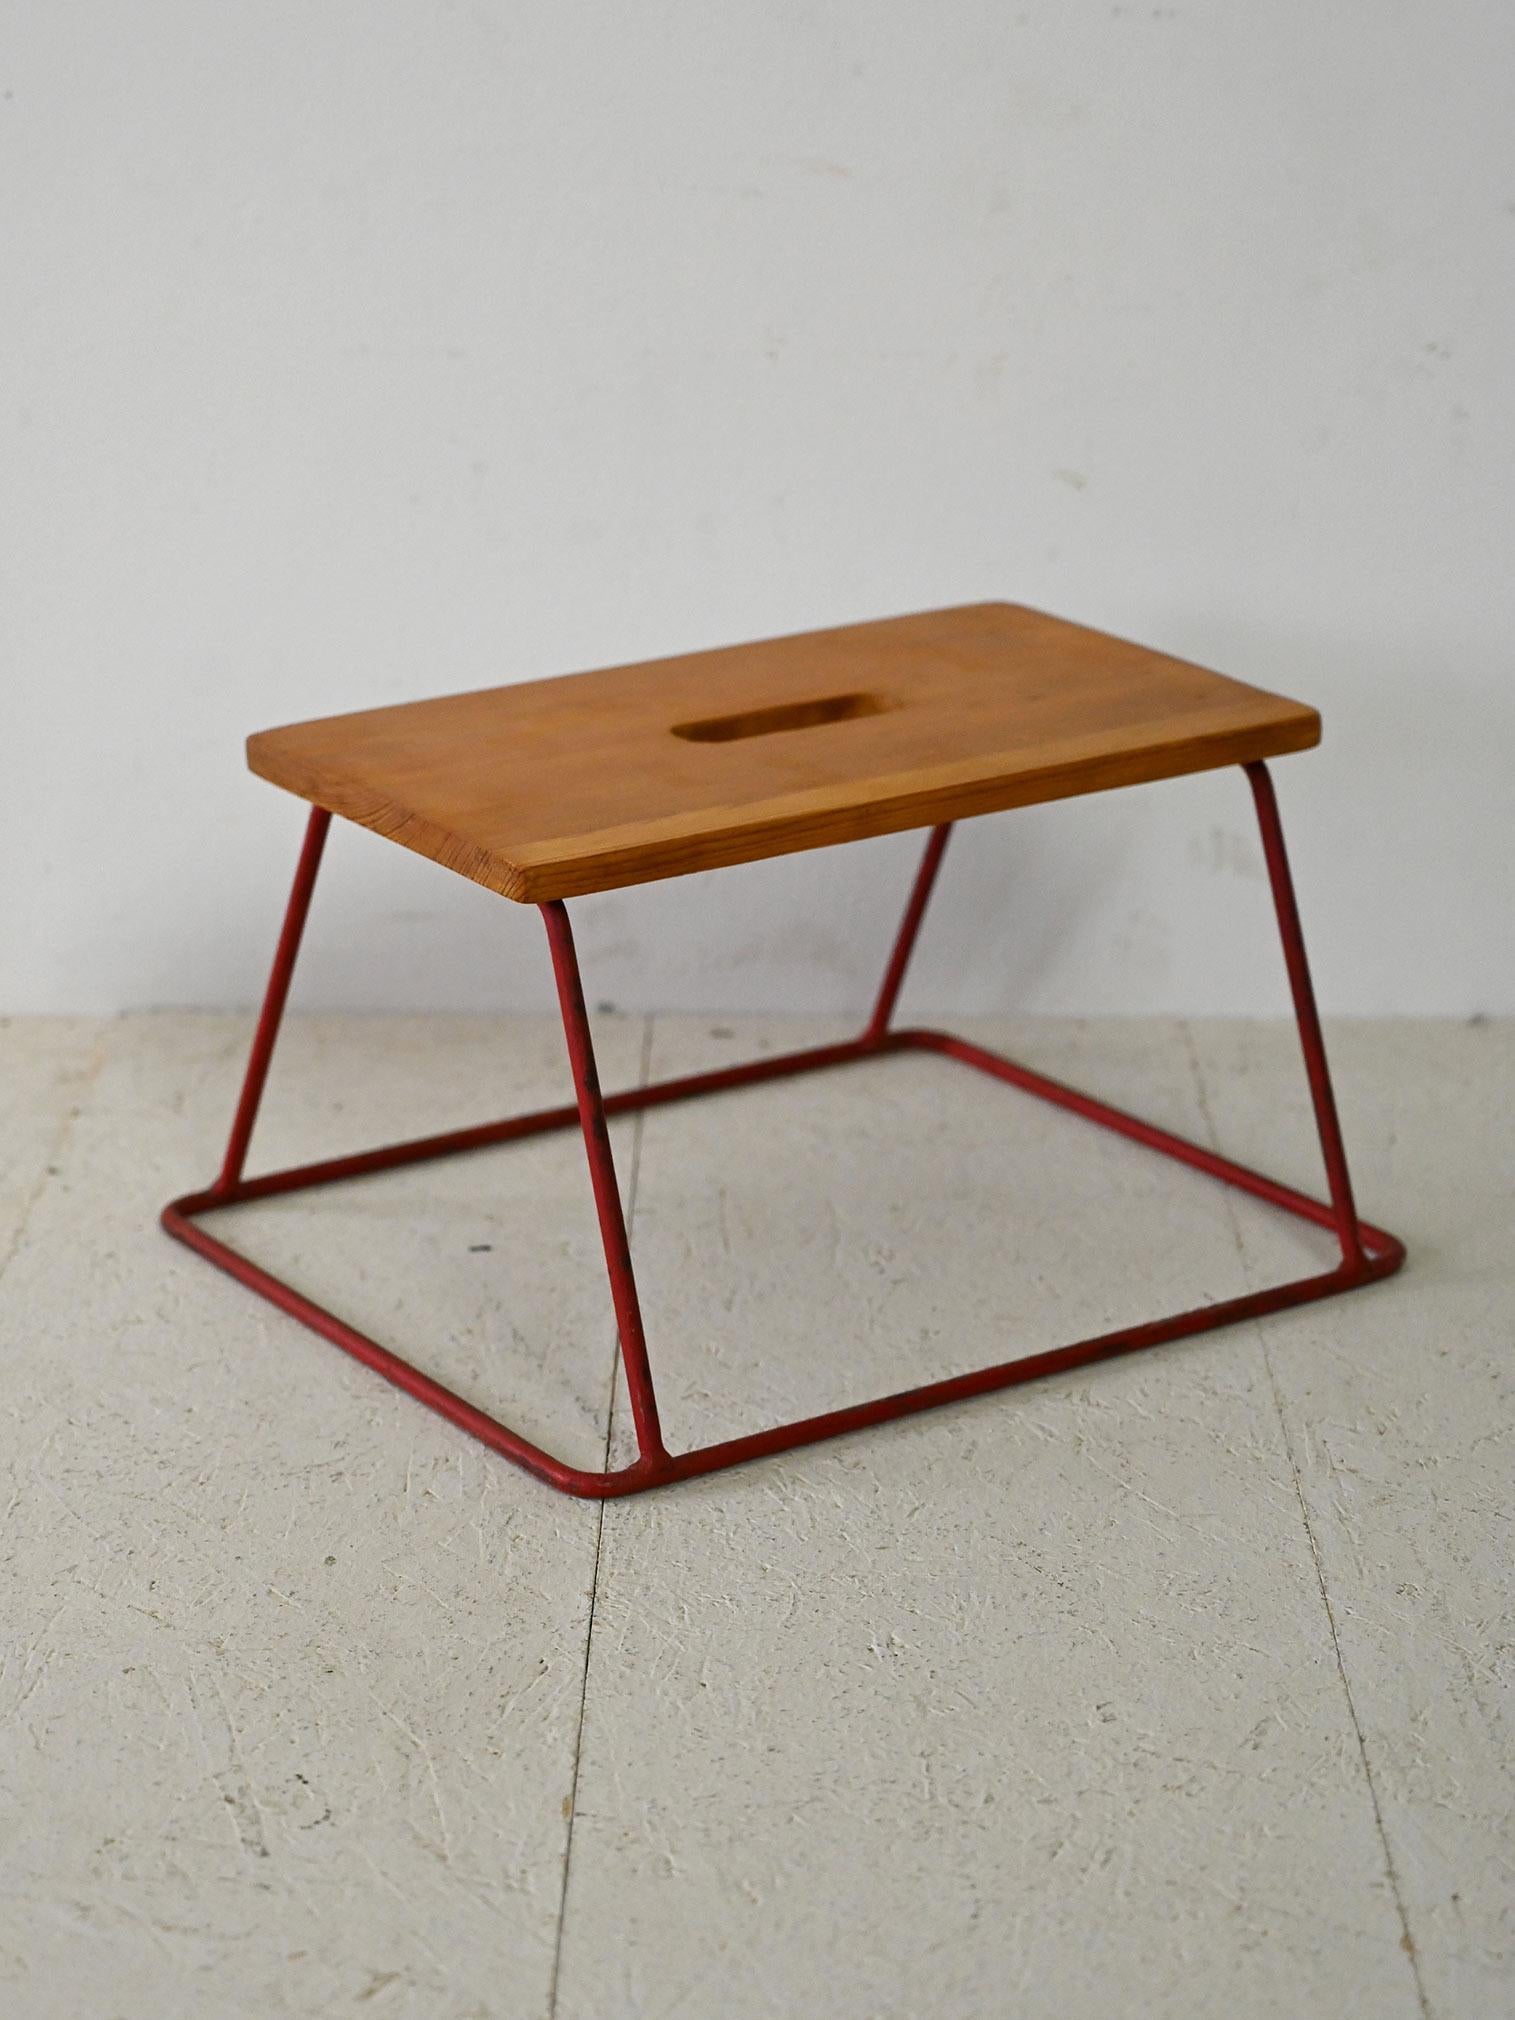 Original Scandinavian stool from the 1960s.

An industrial-flavored piece consisting of a red-painted metal base and a teak seat where there is a hole in the center for easy gripping.
Perfect as a seat for children without sacrificing the aesthetics